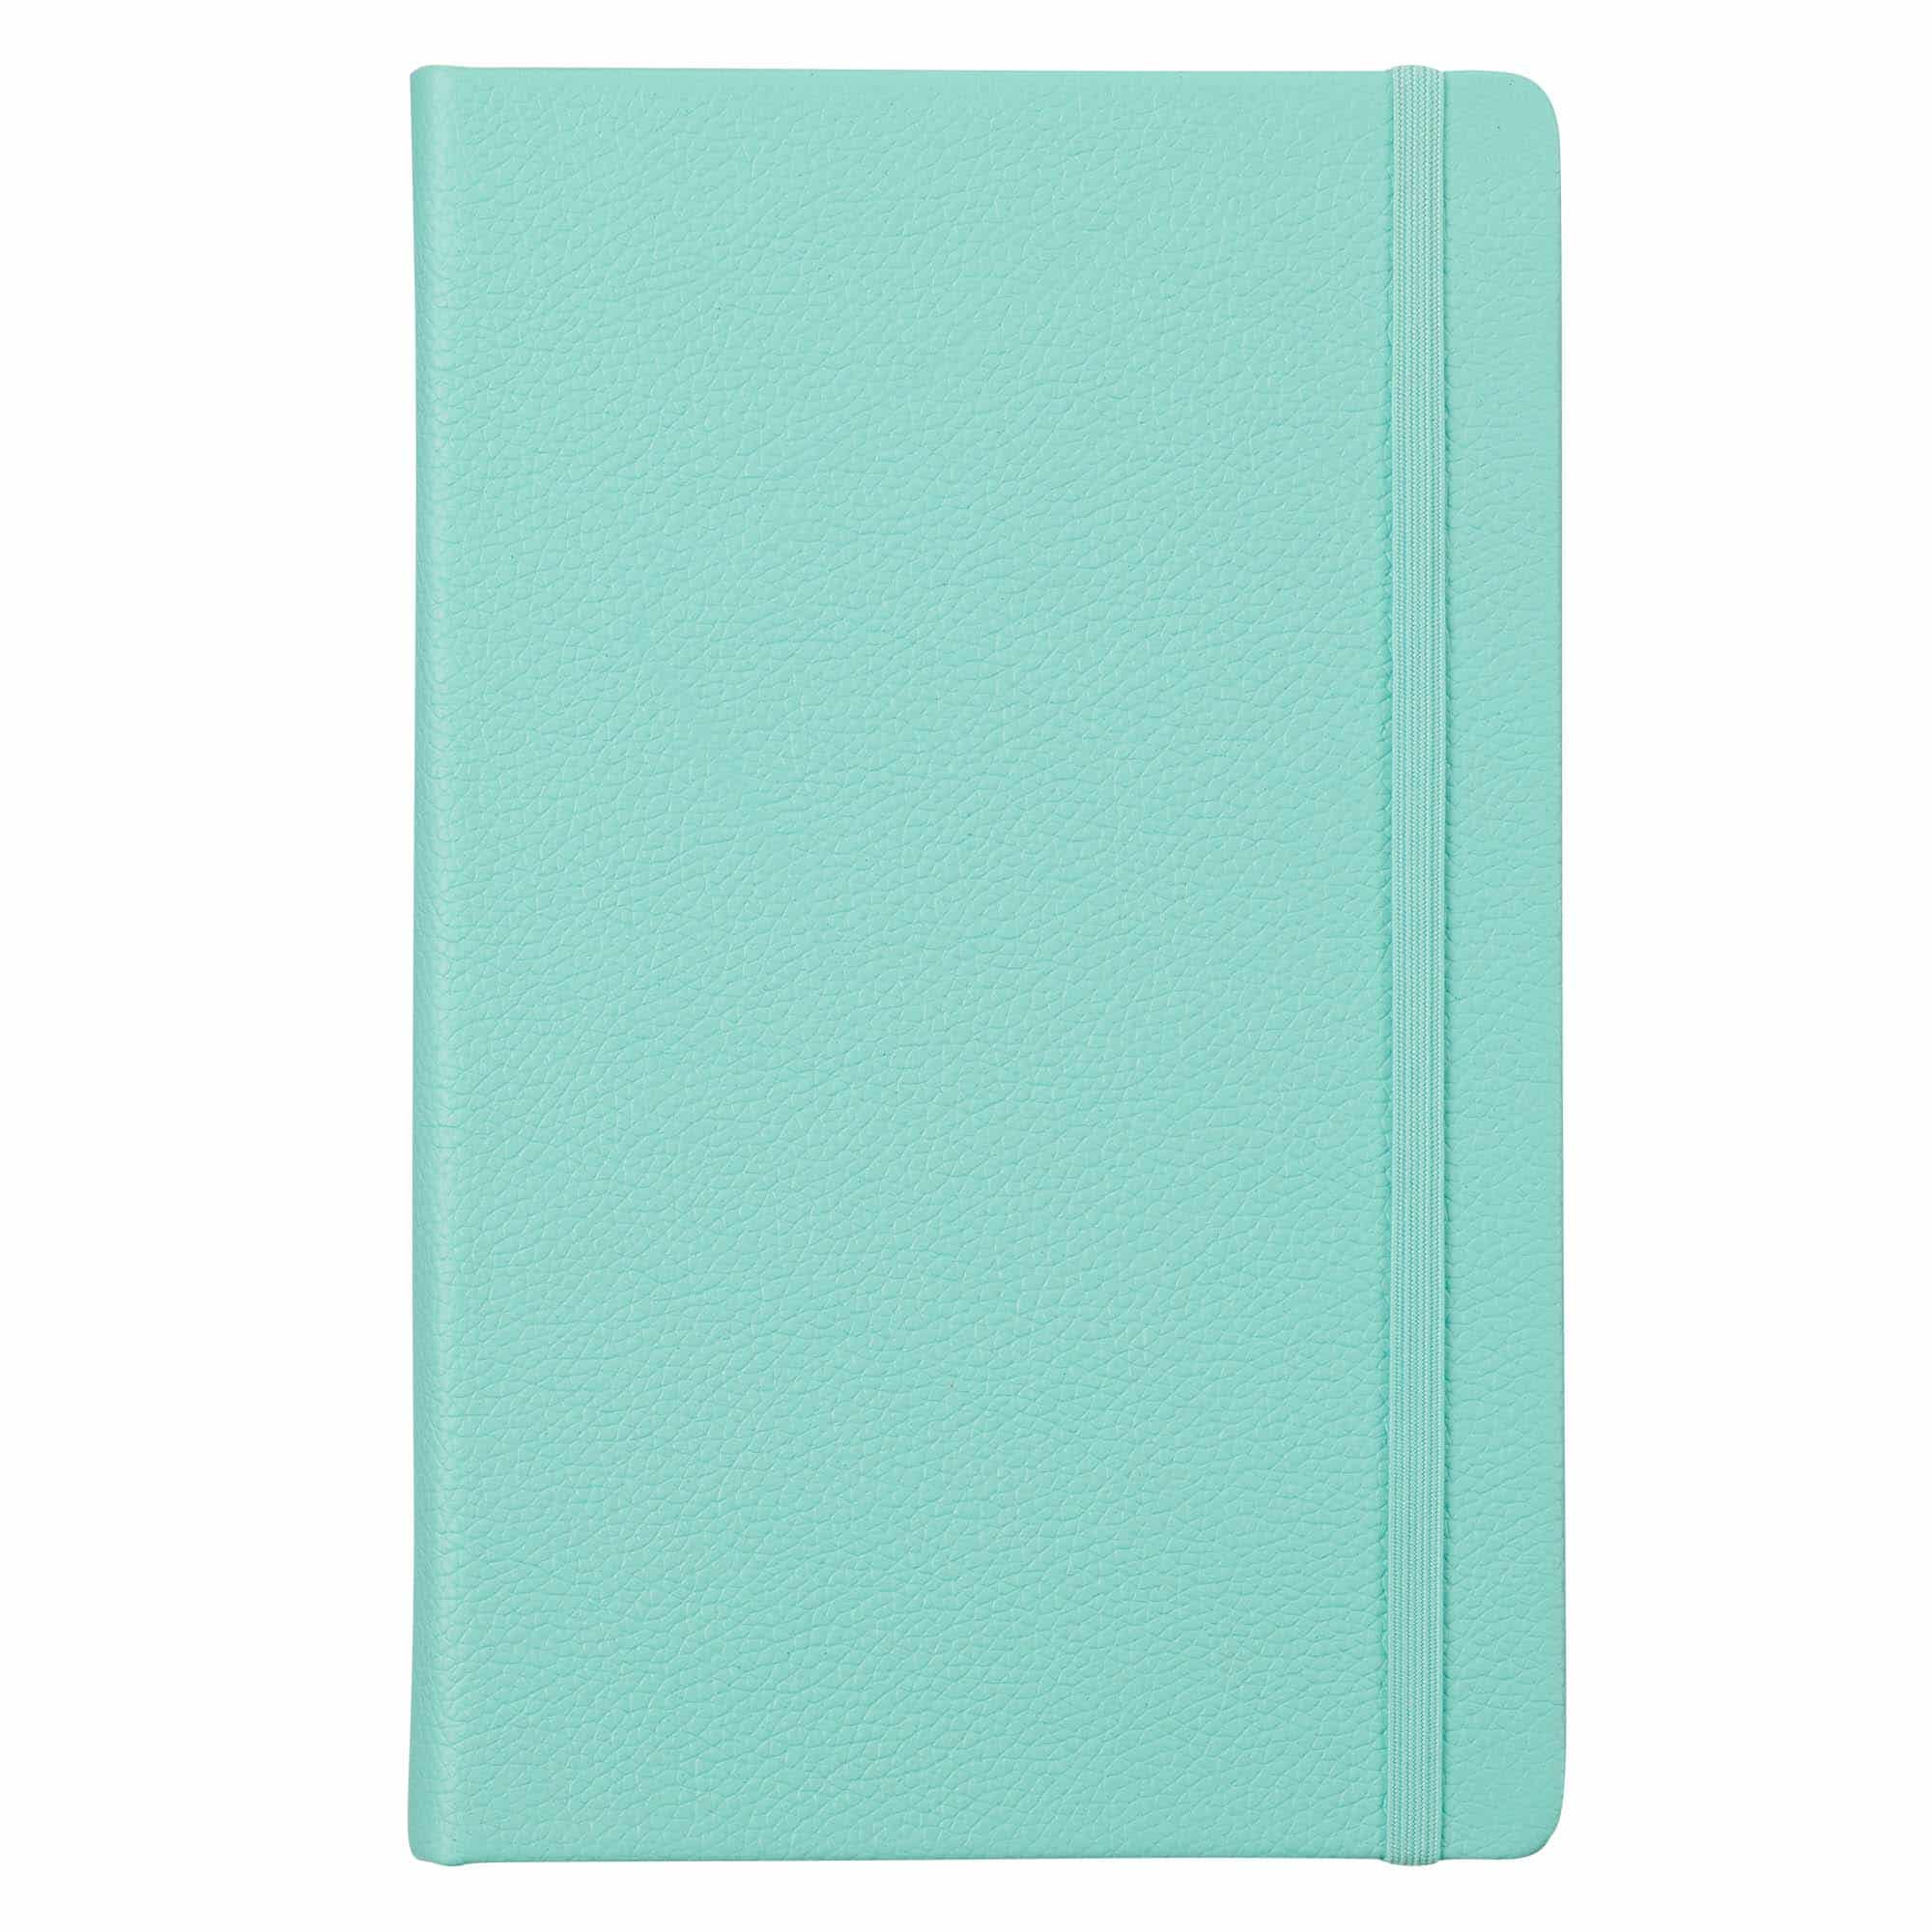 Reef Blue Leather Notebook